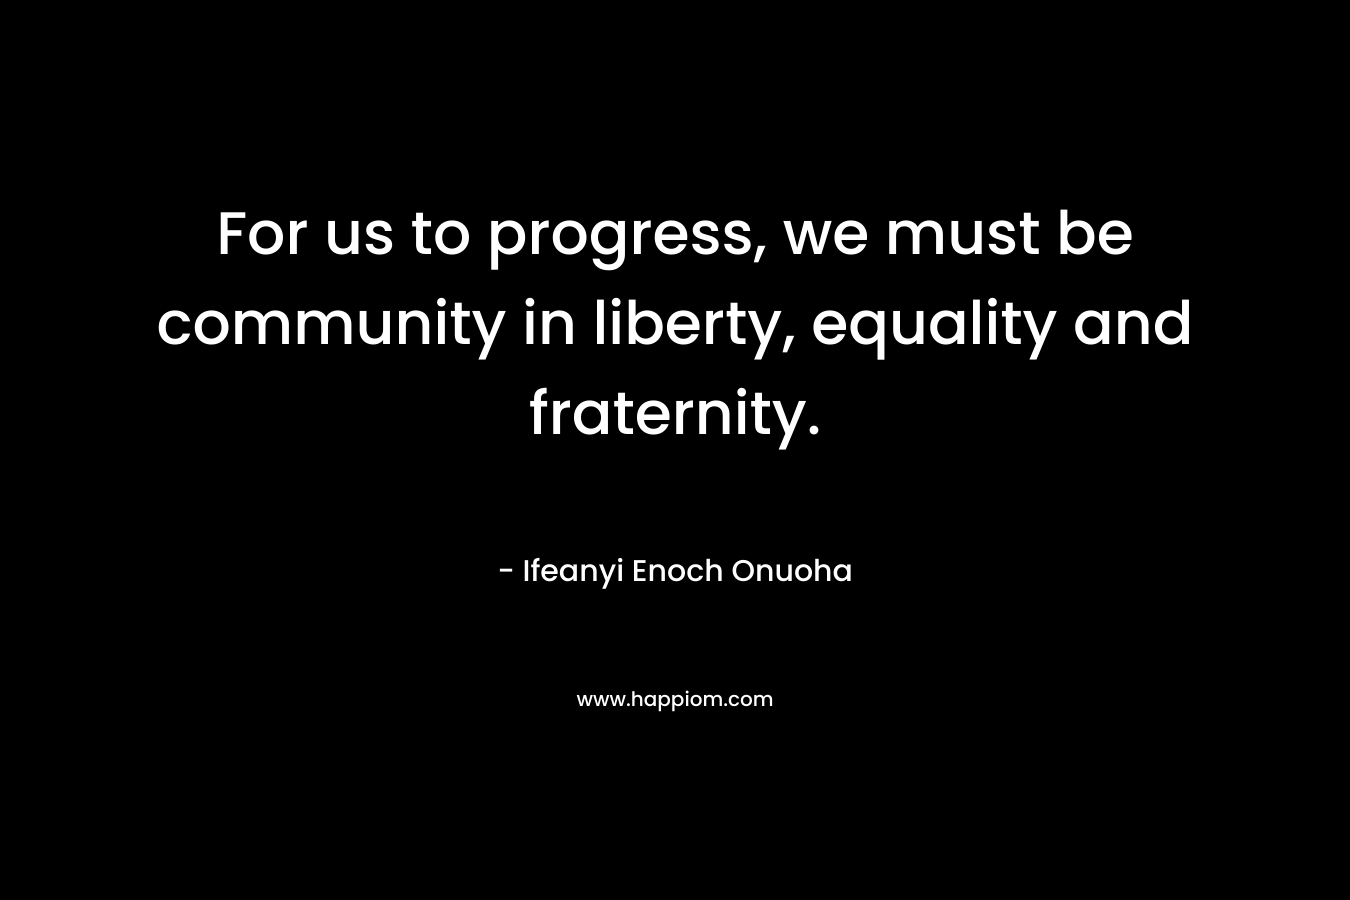 For us to progress, we must be community in liberty, equality and fraternity. – Ifeanyi Enoch Onuoha